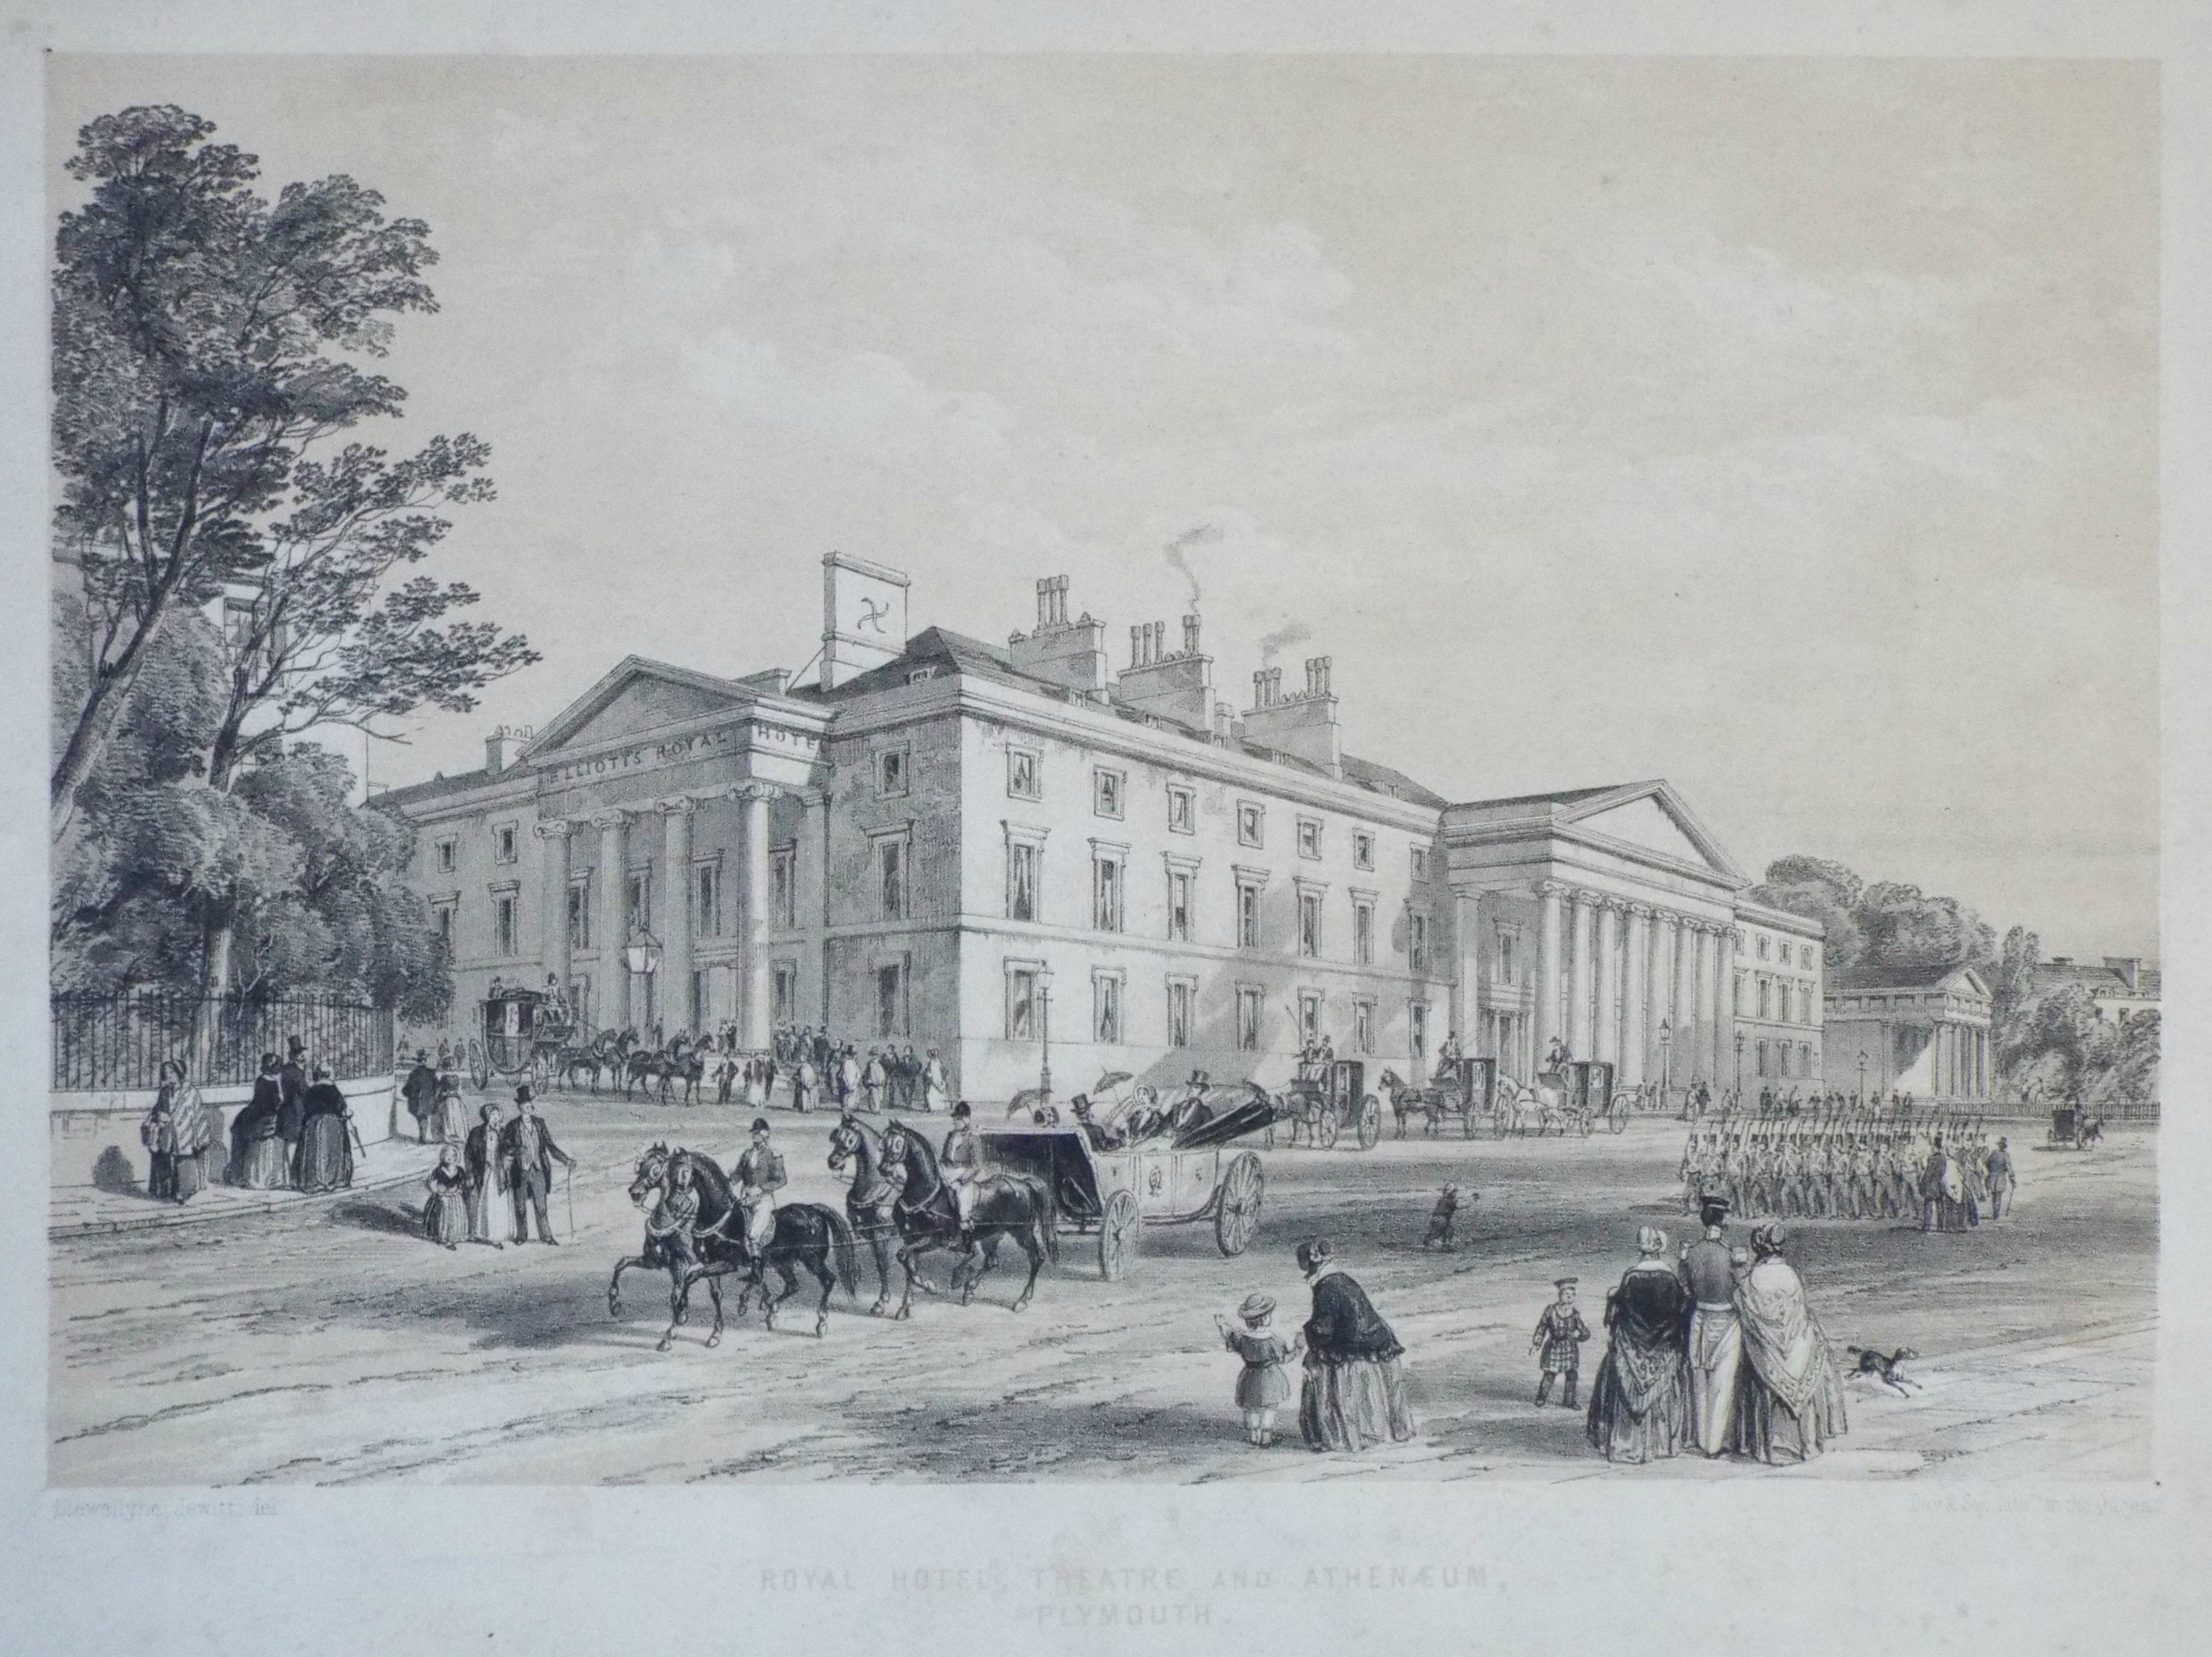 Lithograph - Royal Hotel, Theatre and Athenaeum, Plymouth.